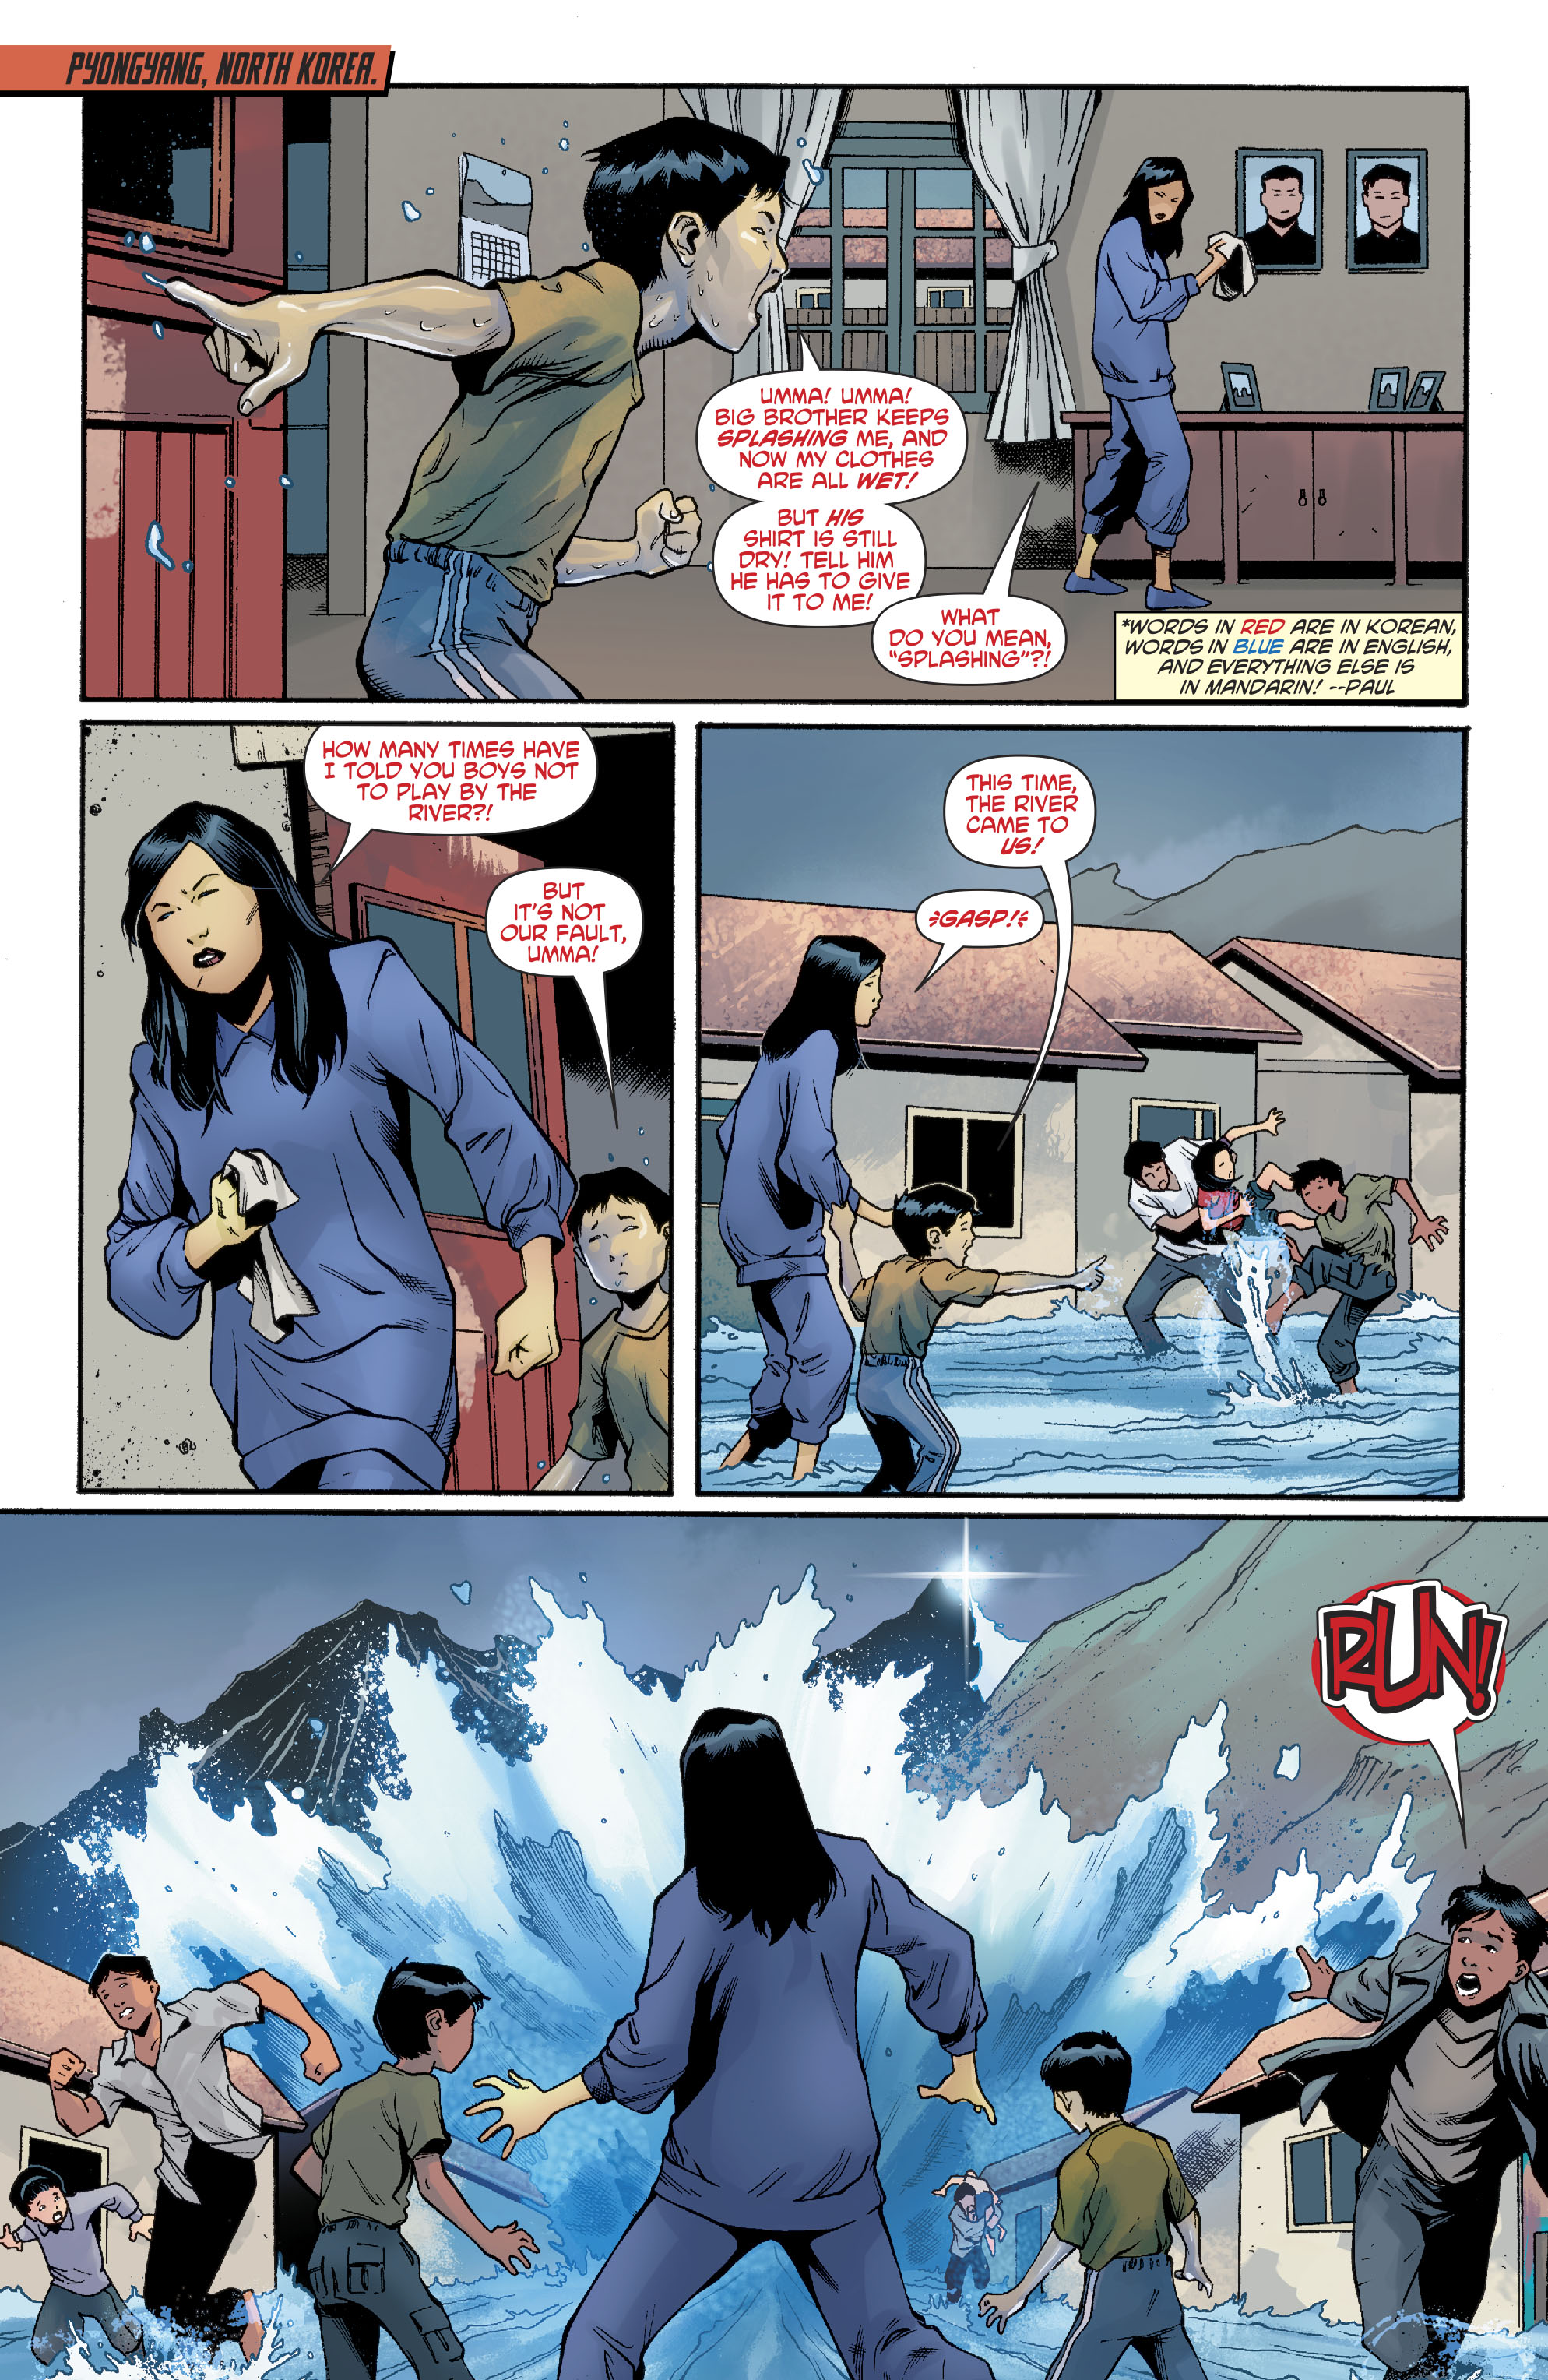 New Super-Man and the Justice League of China (2016-): Chapter 23 - Page 4